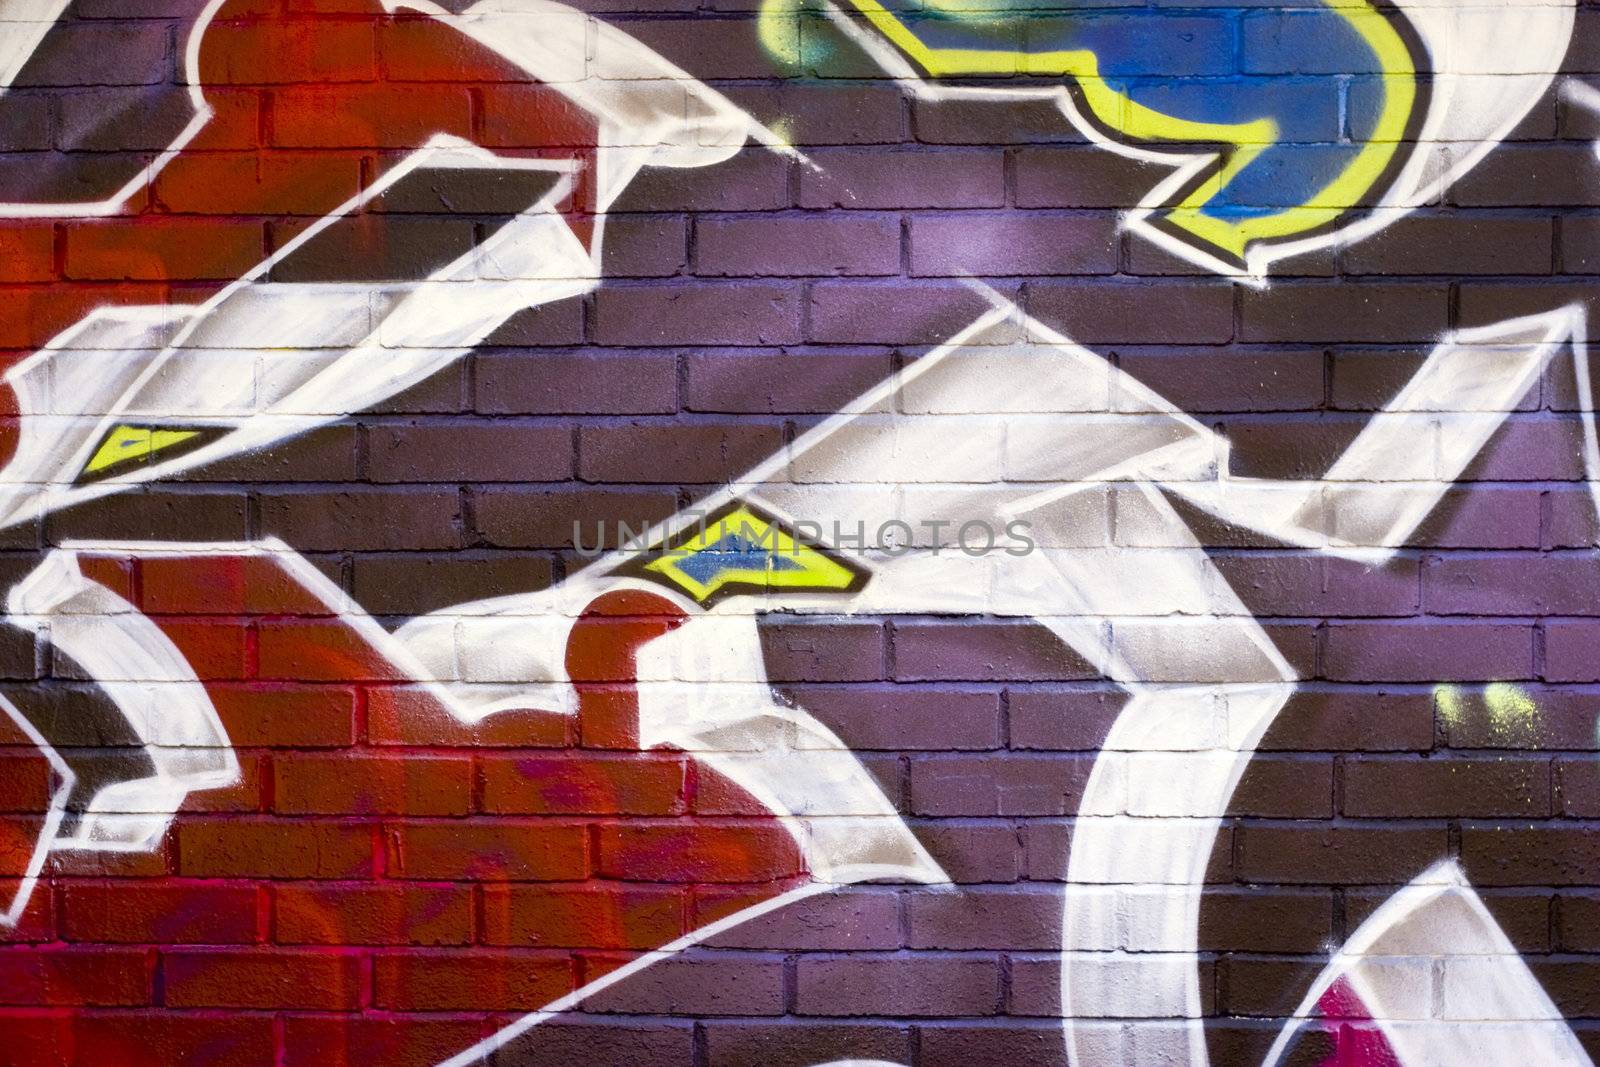 Graffiti texture - works great as a background or backdrop in any design.